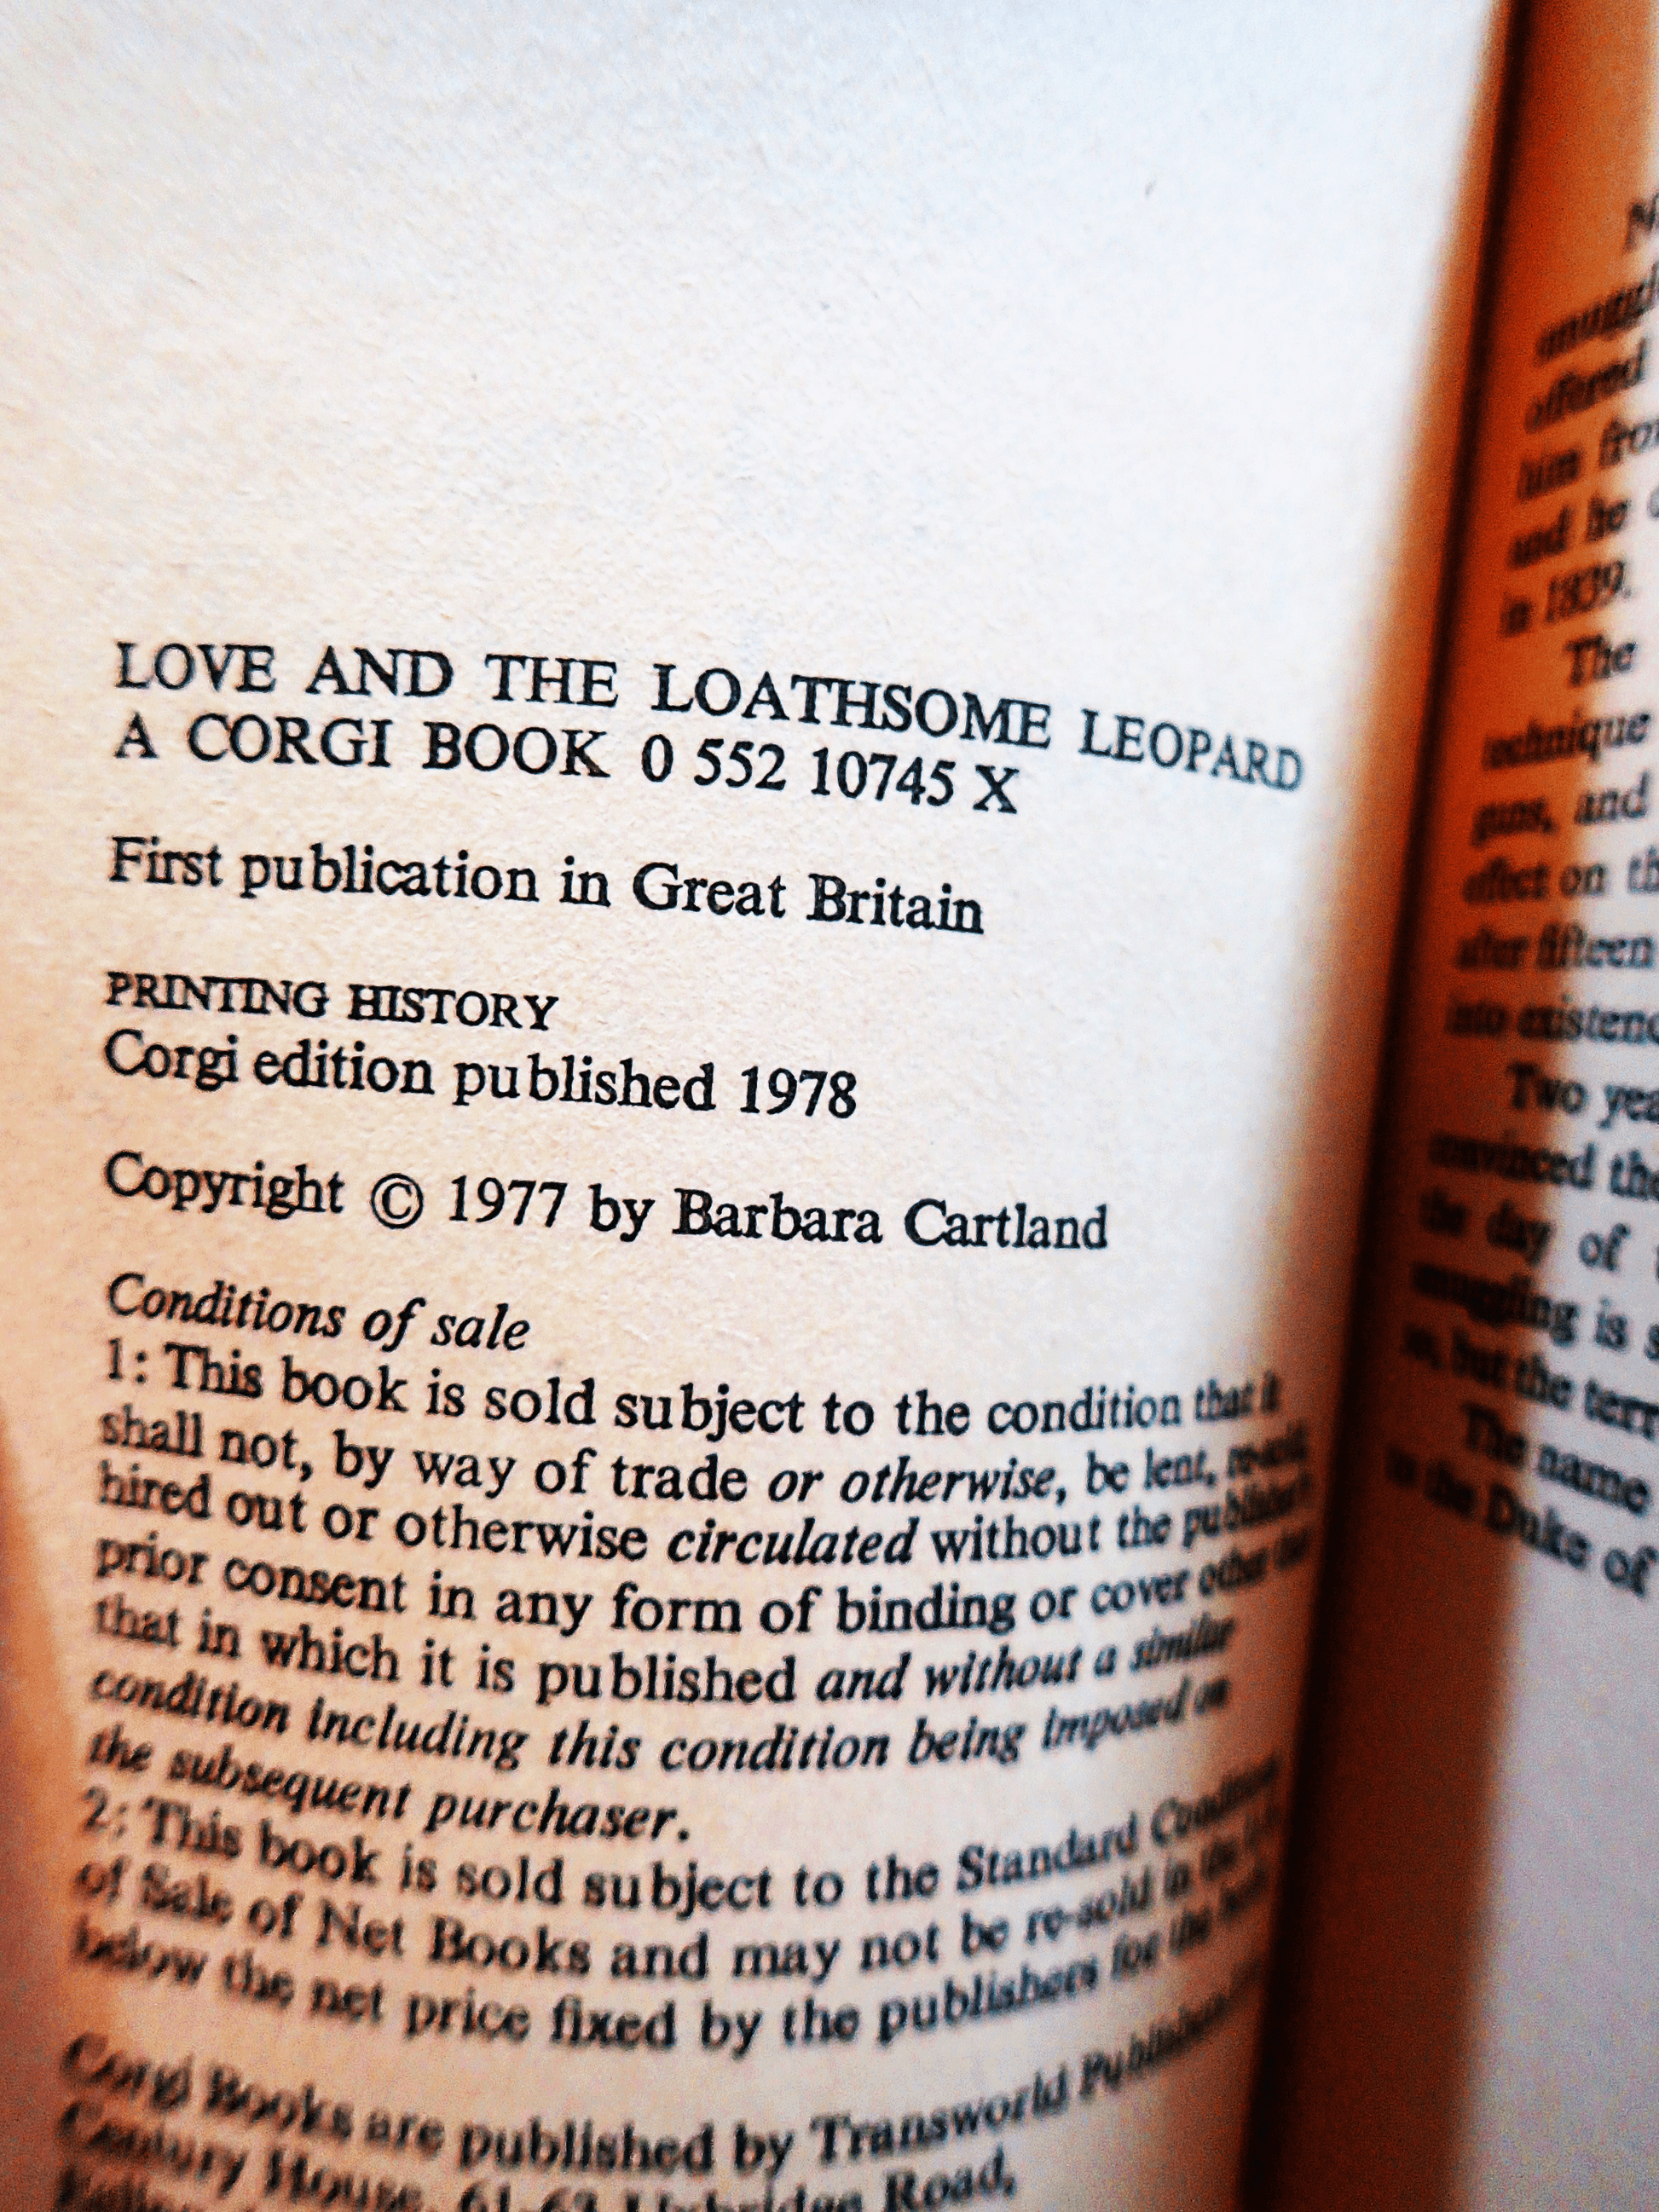 Publication details of Love and the Loathsome Leopard Barbara Cartland Corgi Paperback showing first published 1978.